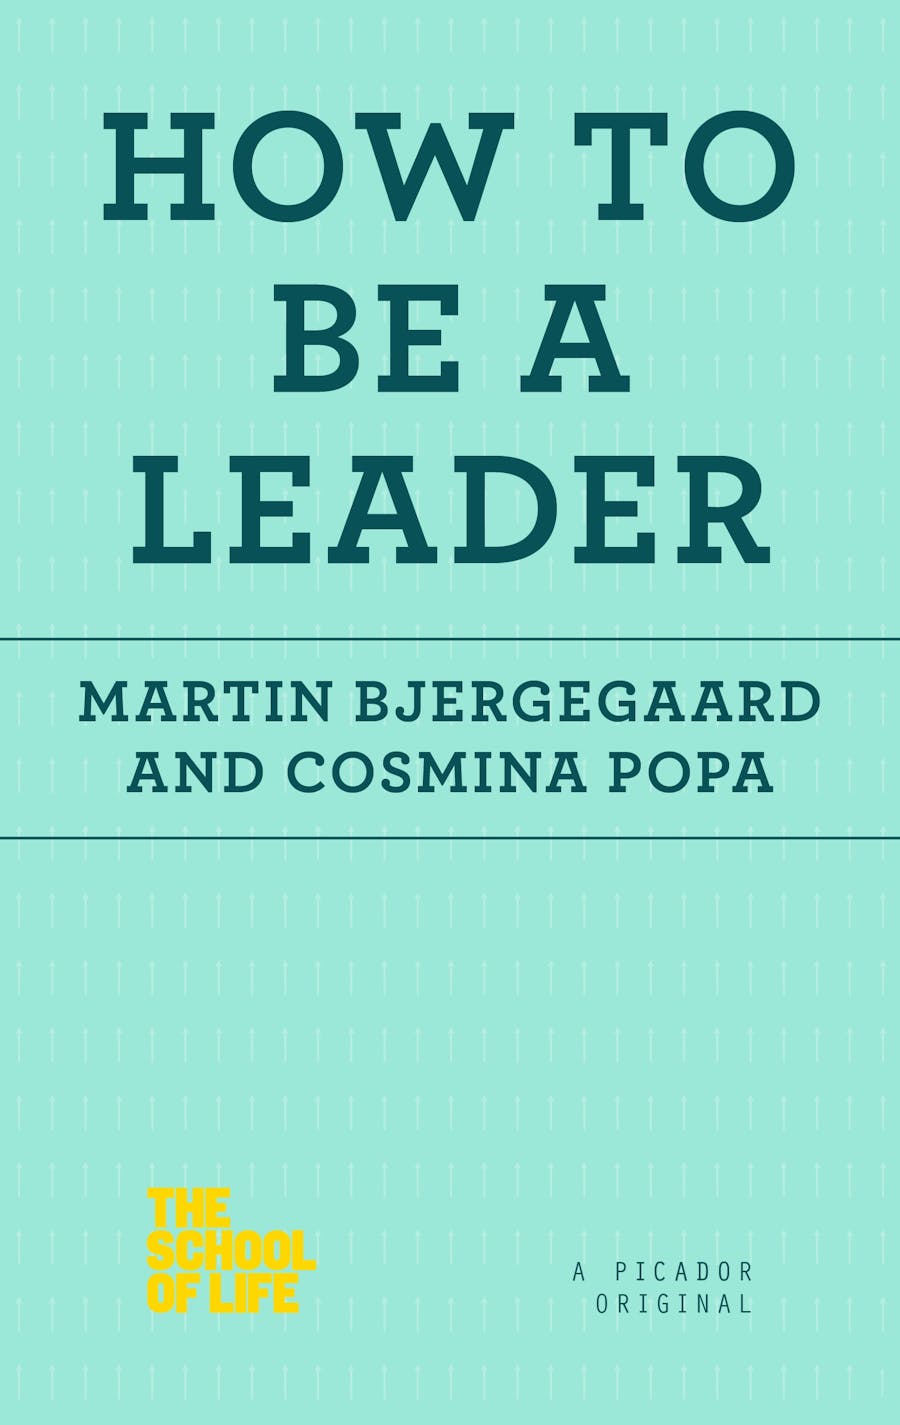 How to Be a Leader by Martin Bjergegaard and Cosmina Popa